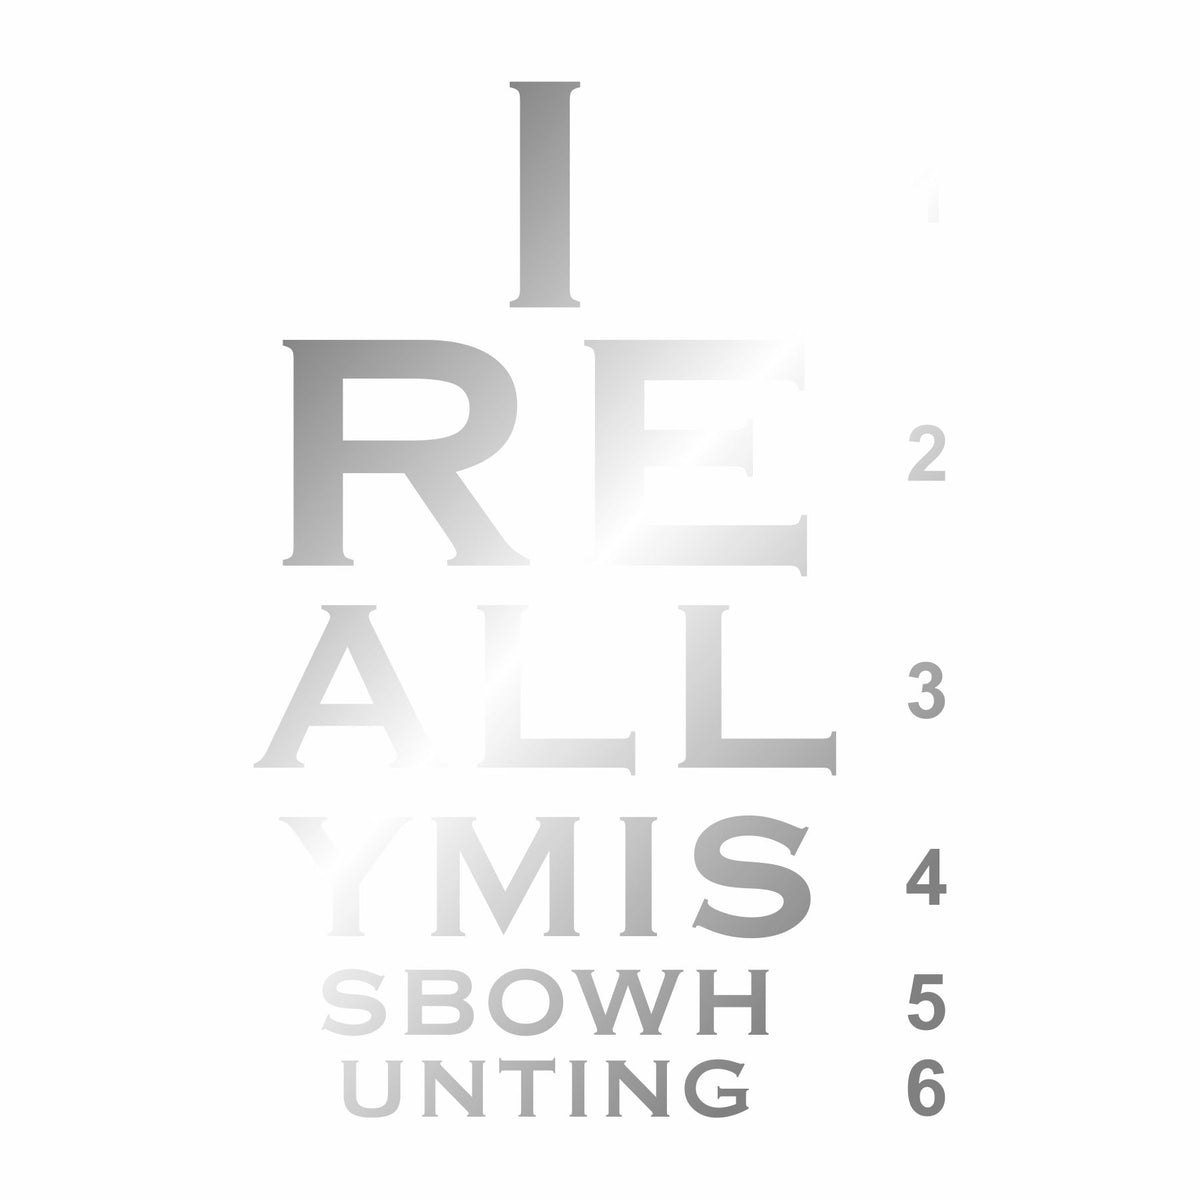 I Really Miss Bow Hunting - Vinyl Decal - Free Shipping